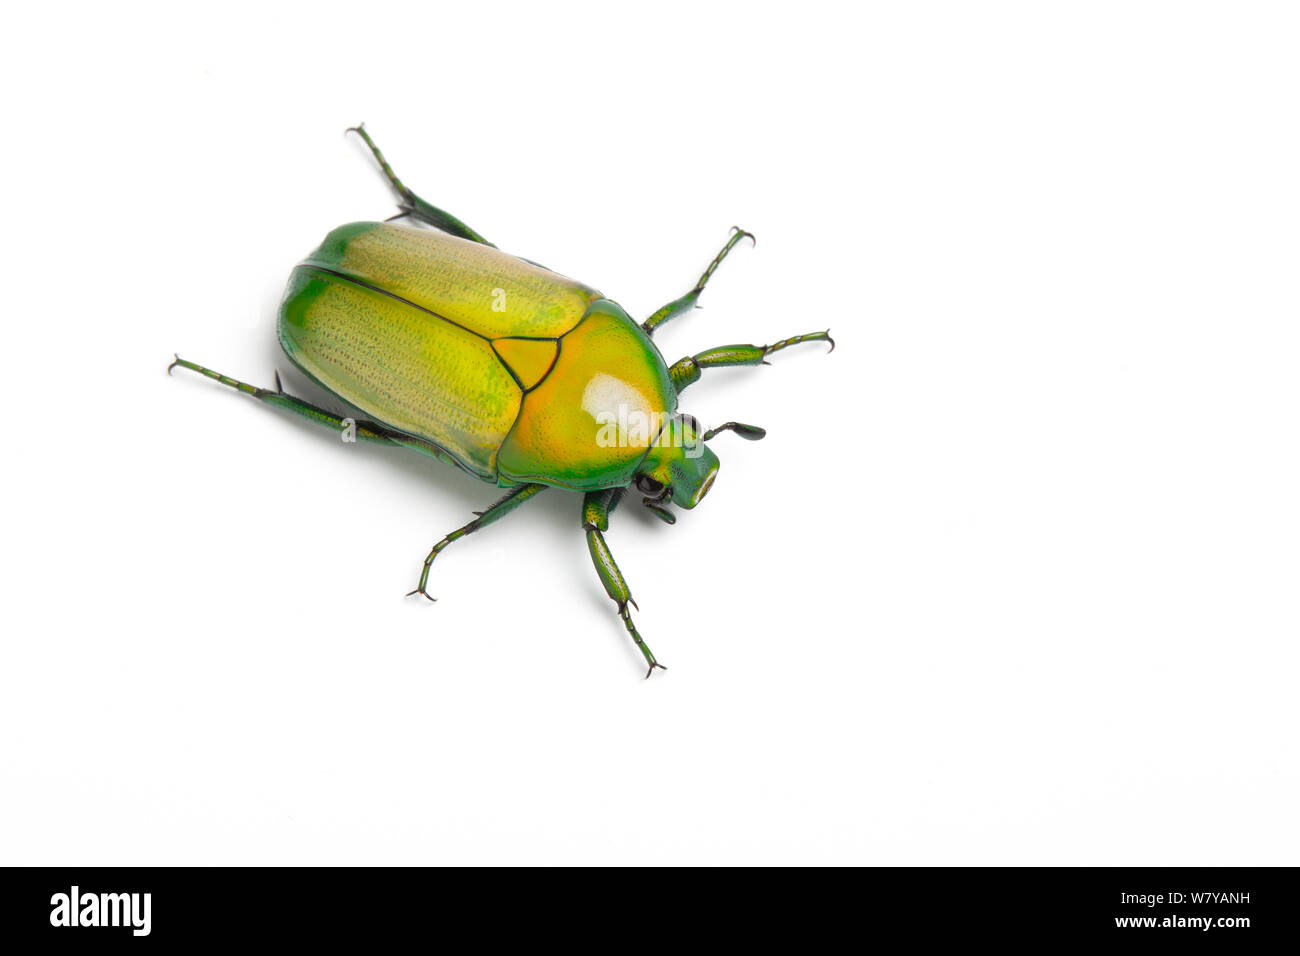 African jewel beetle / Fruit chafer (Chlorocala africana camerunica) Captive, occurs in Africa. Stock Photo